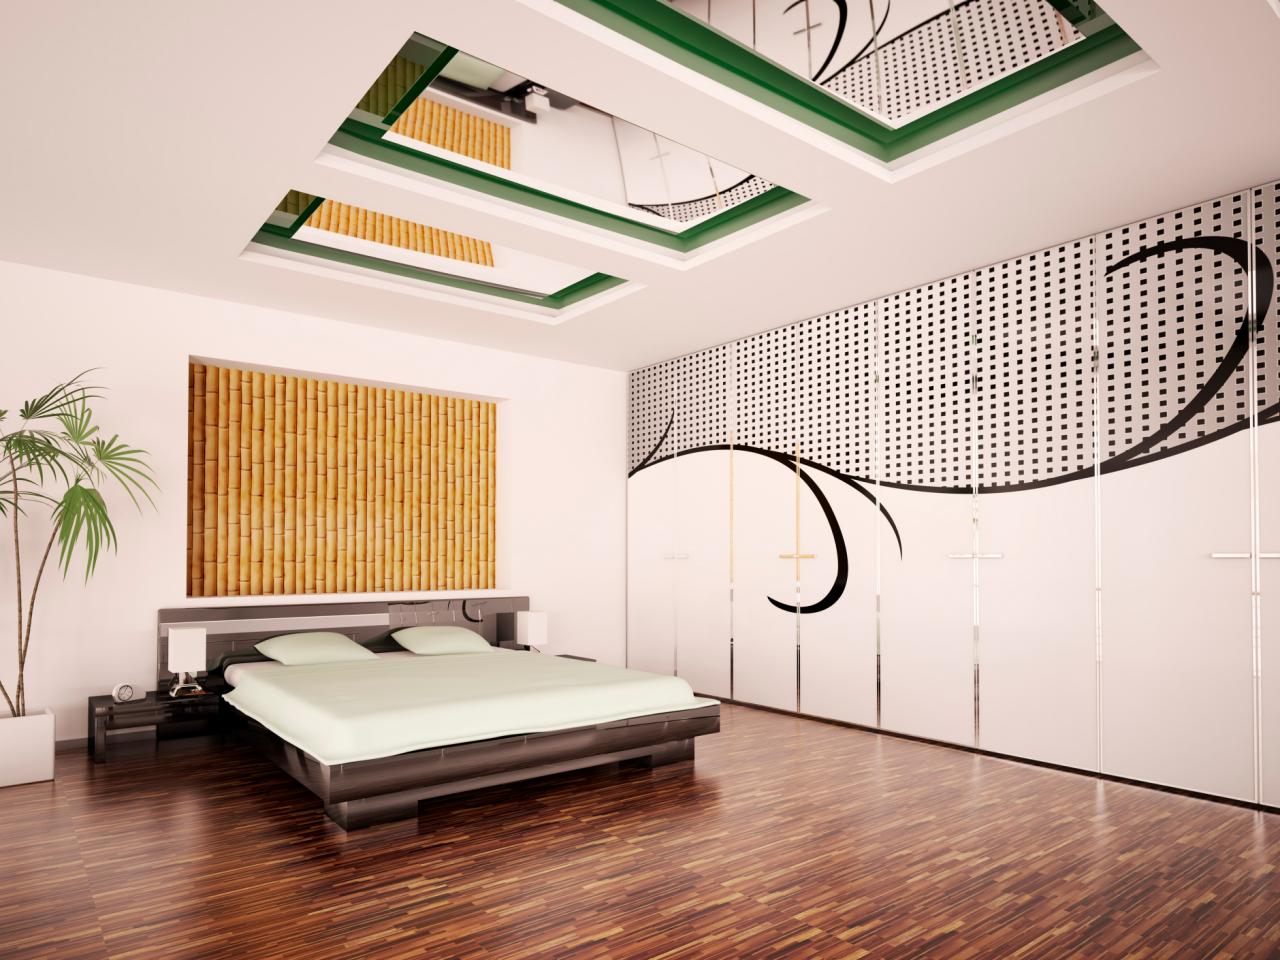 ts 176895965 mirrored bedroom ceiling h